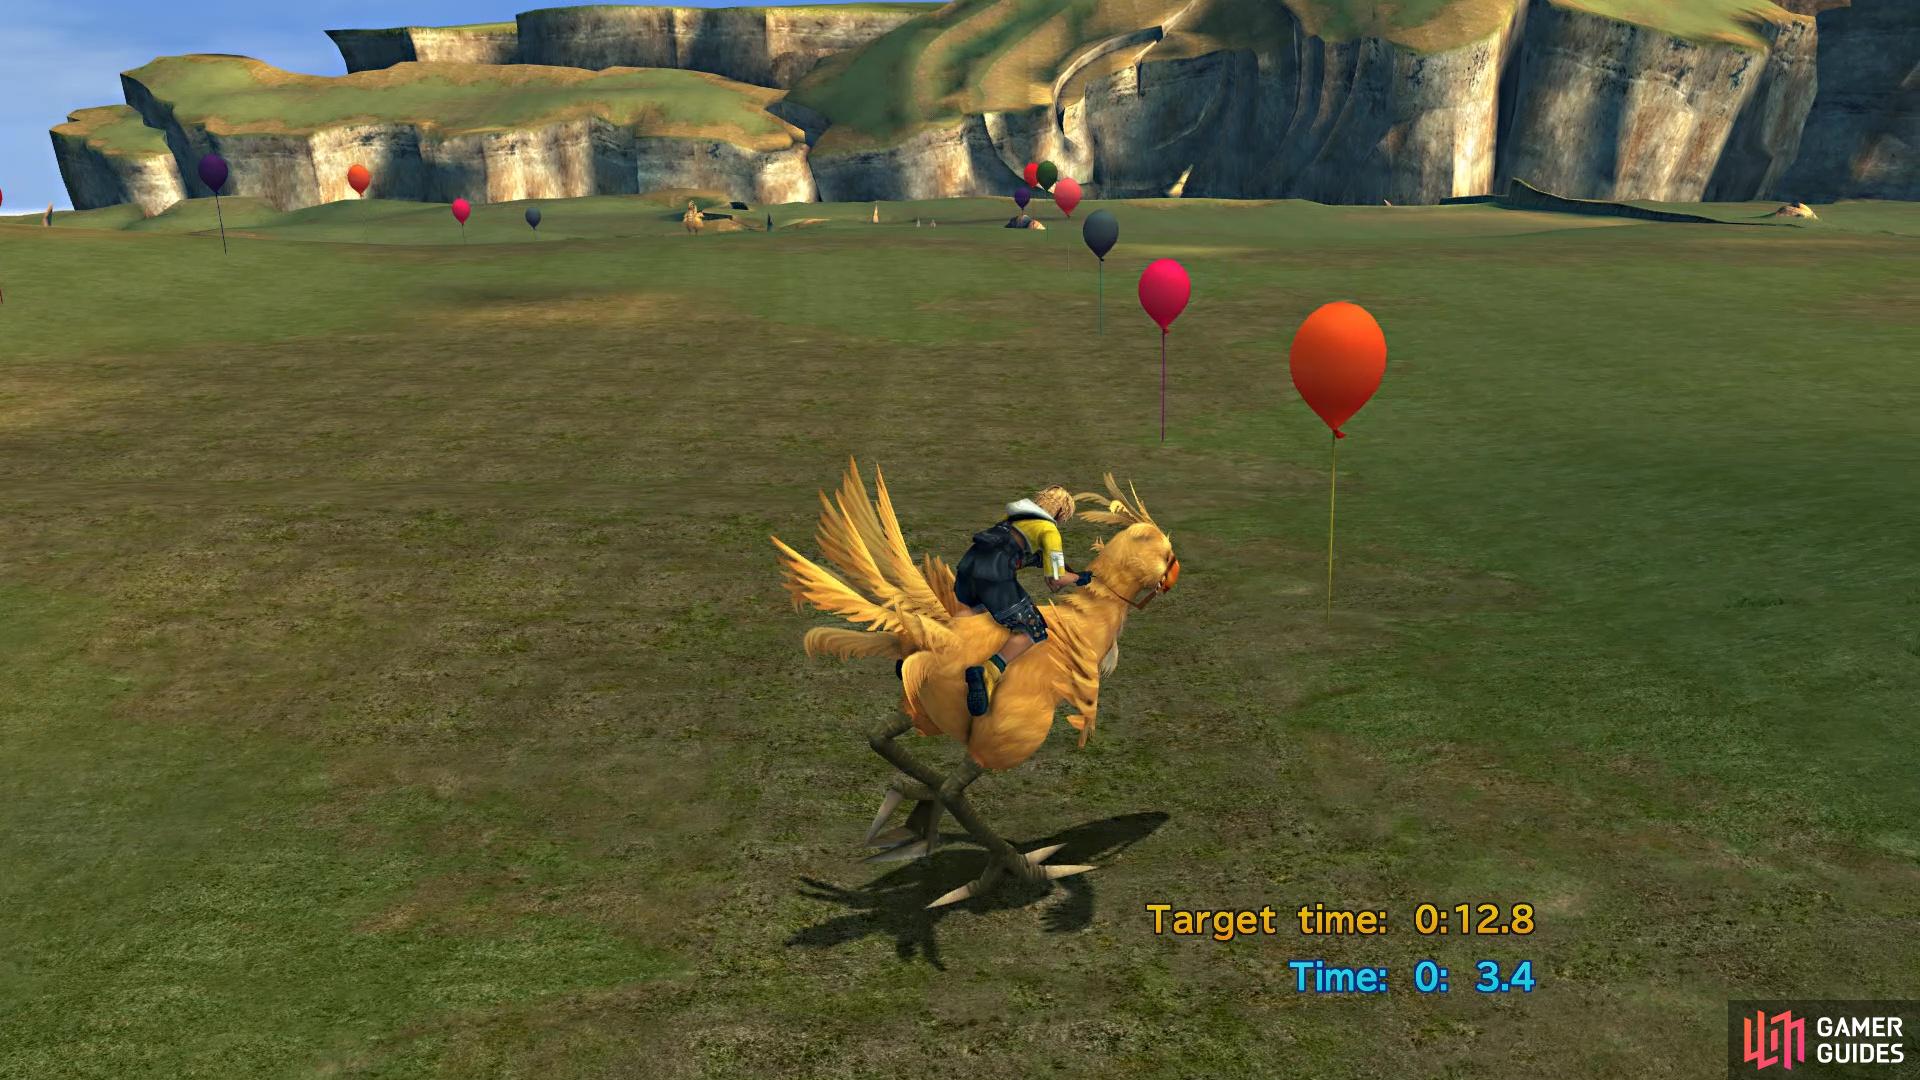 but the chocobo will steer itself whichever way it wants